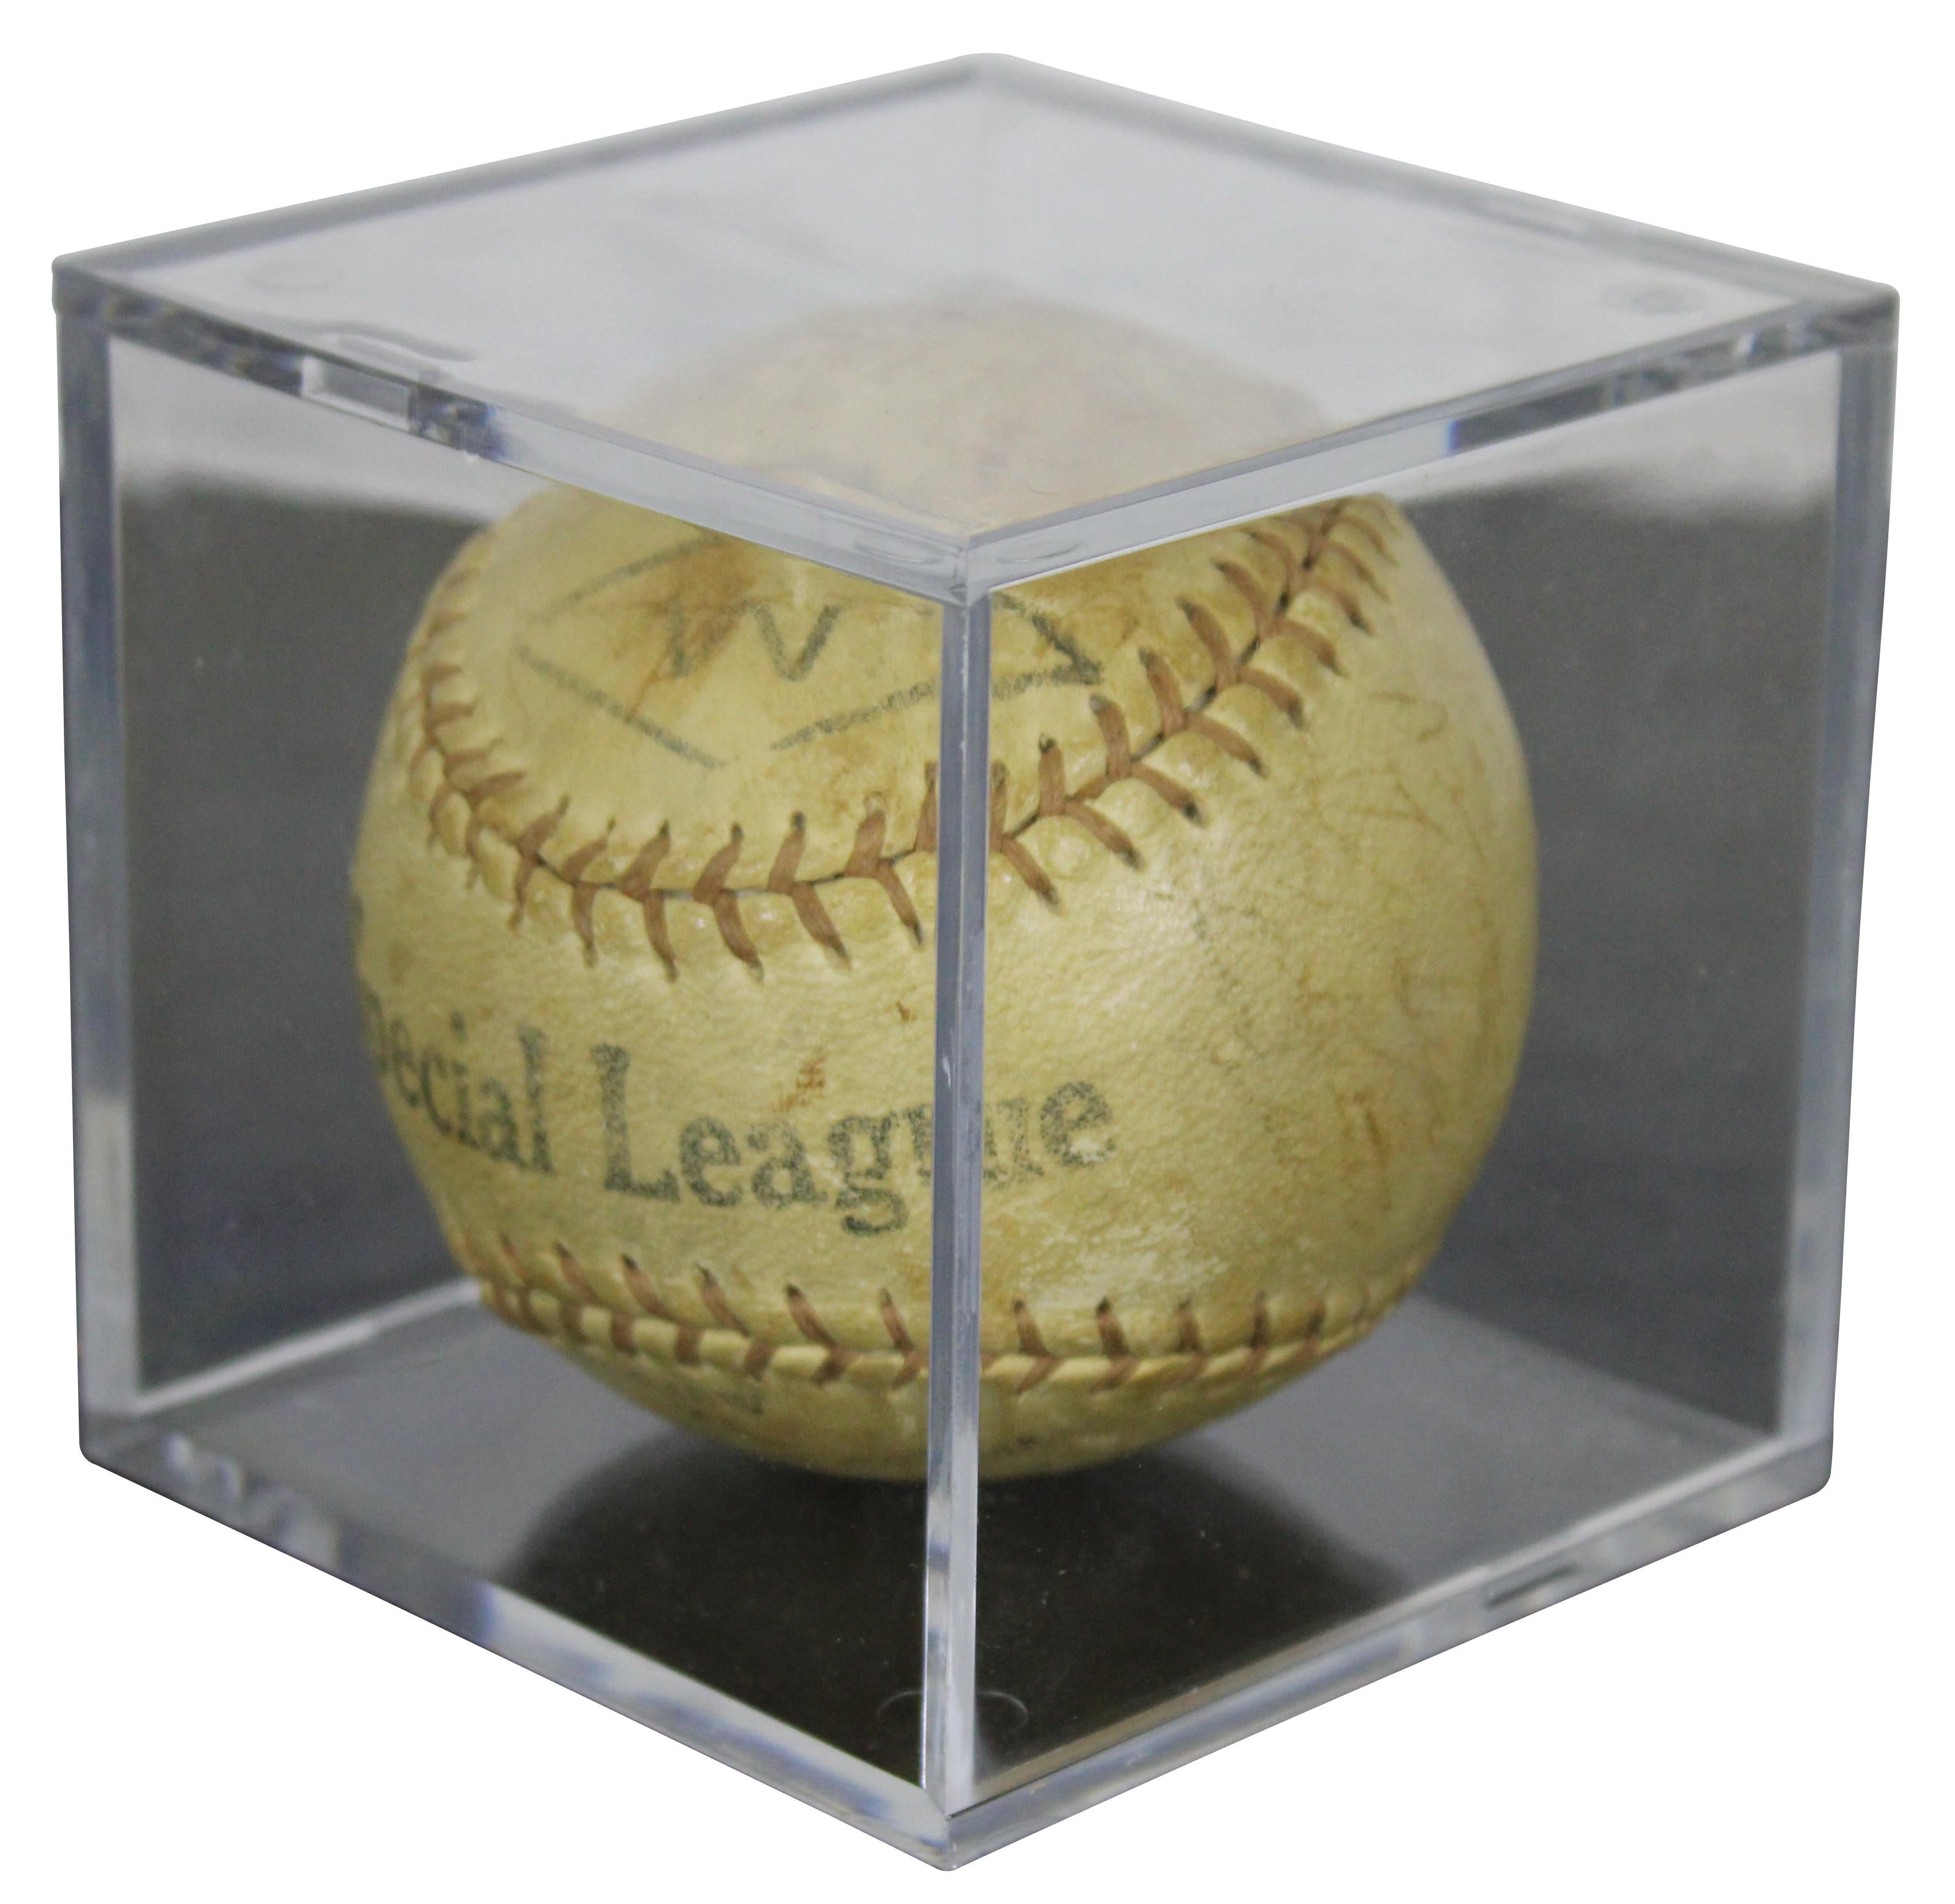 Vintage Special League S48W horsehide baseball signed by members of the 1949 Cleveland Indians baseball team. Ball includes approximately 26 signatures (some are extremely faded). Identifyable names include: Satchel Paige, Mickey Vernon, Jim Hegan,